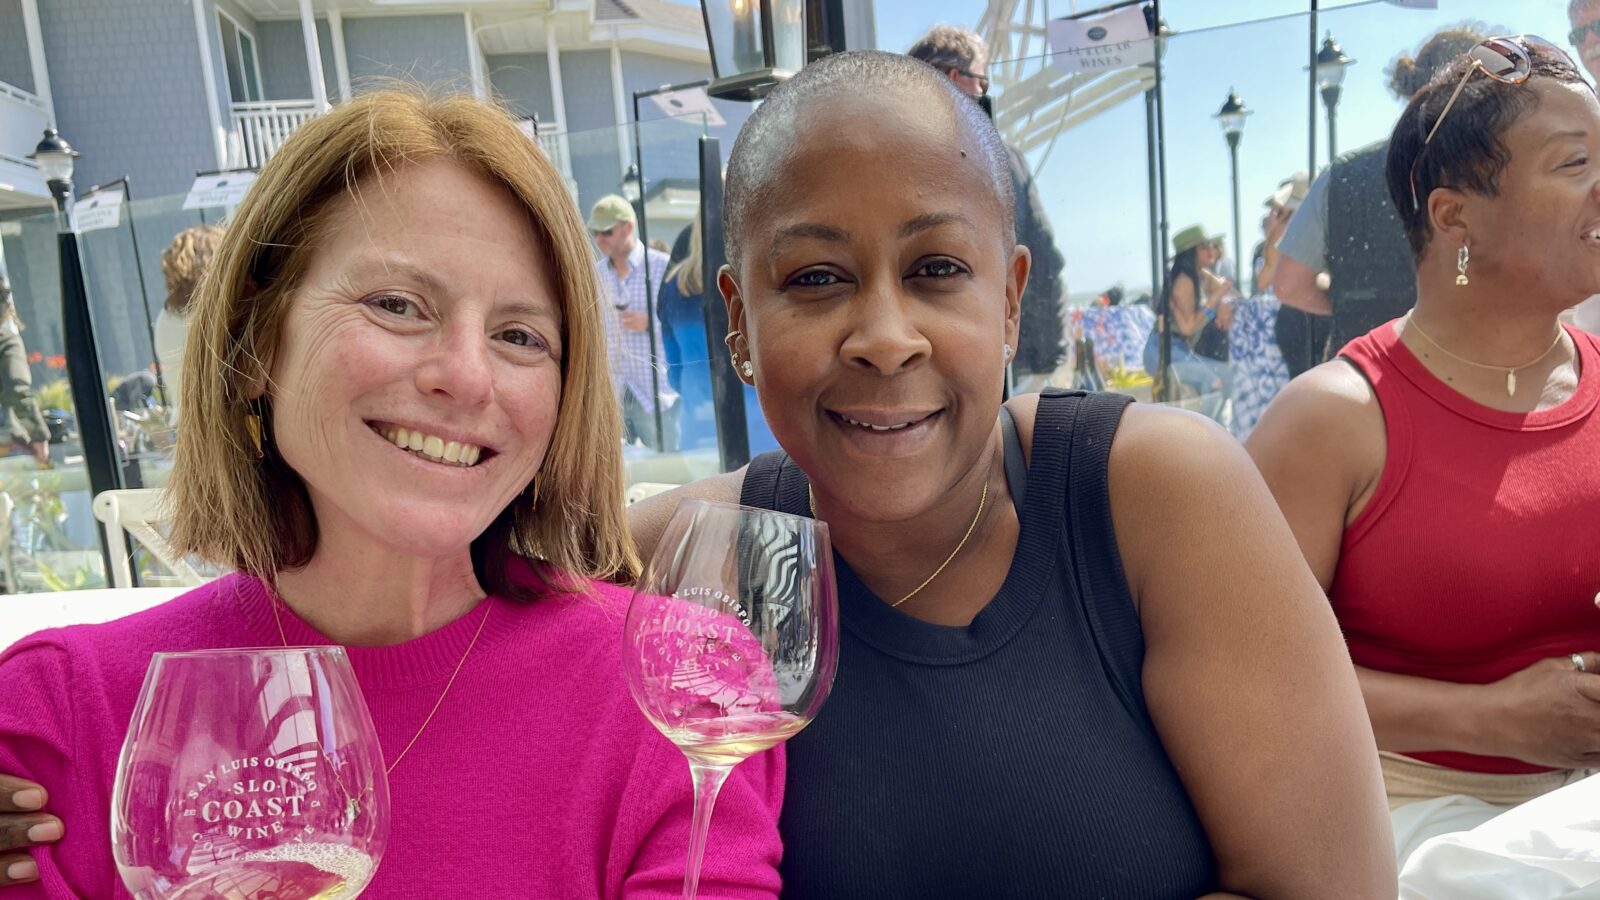 Oceano CEO Rachel Martin and wine media expert Julia Coney tasting wine together at the SLO Wine Classic